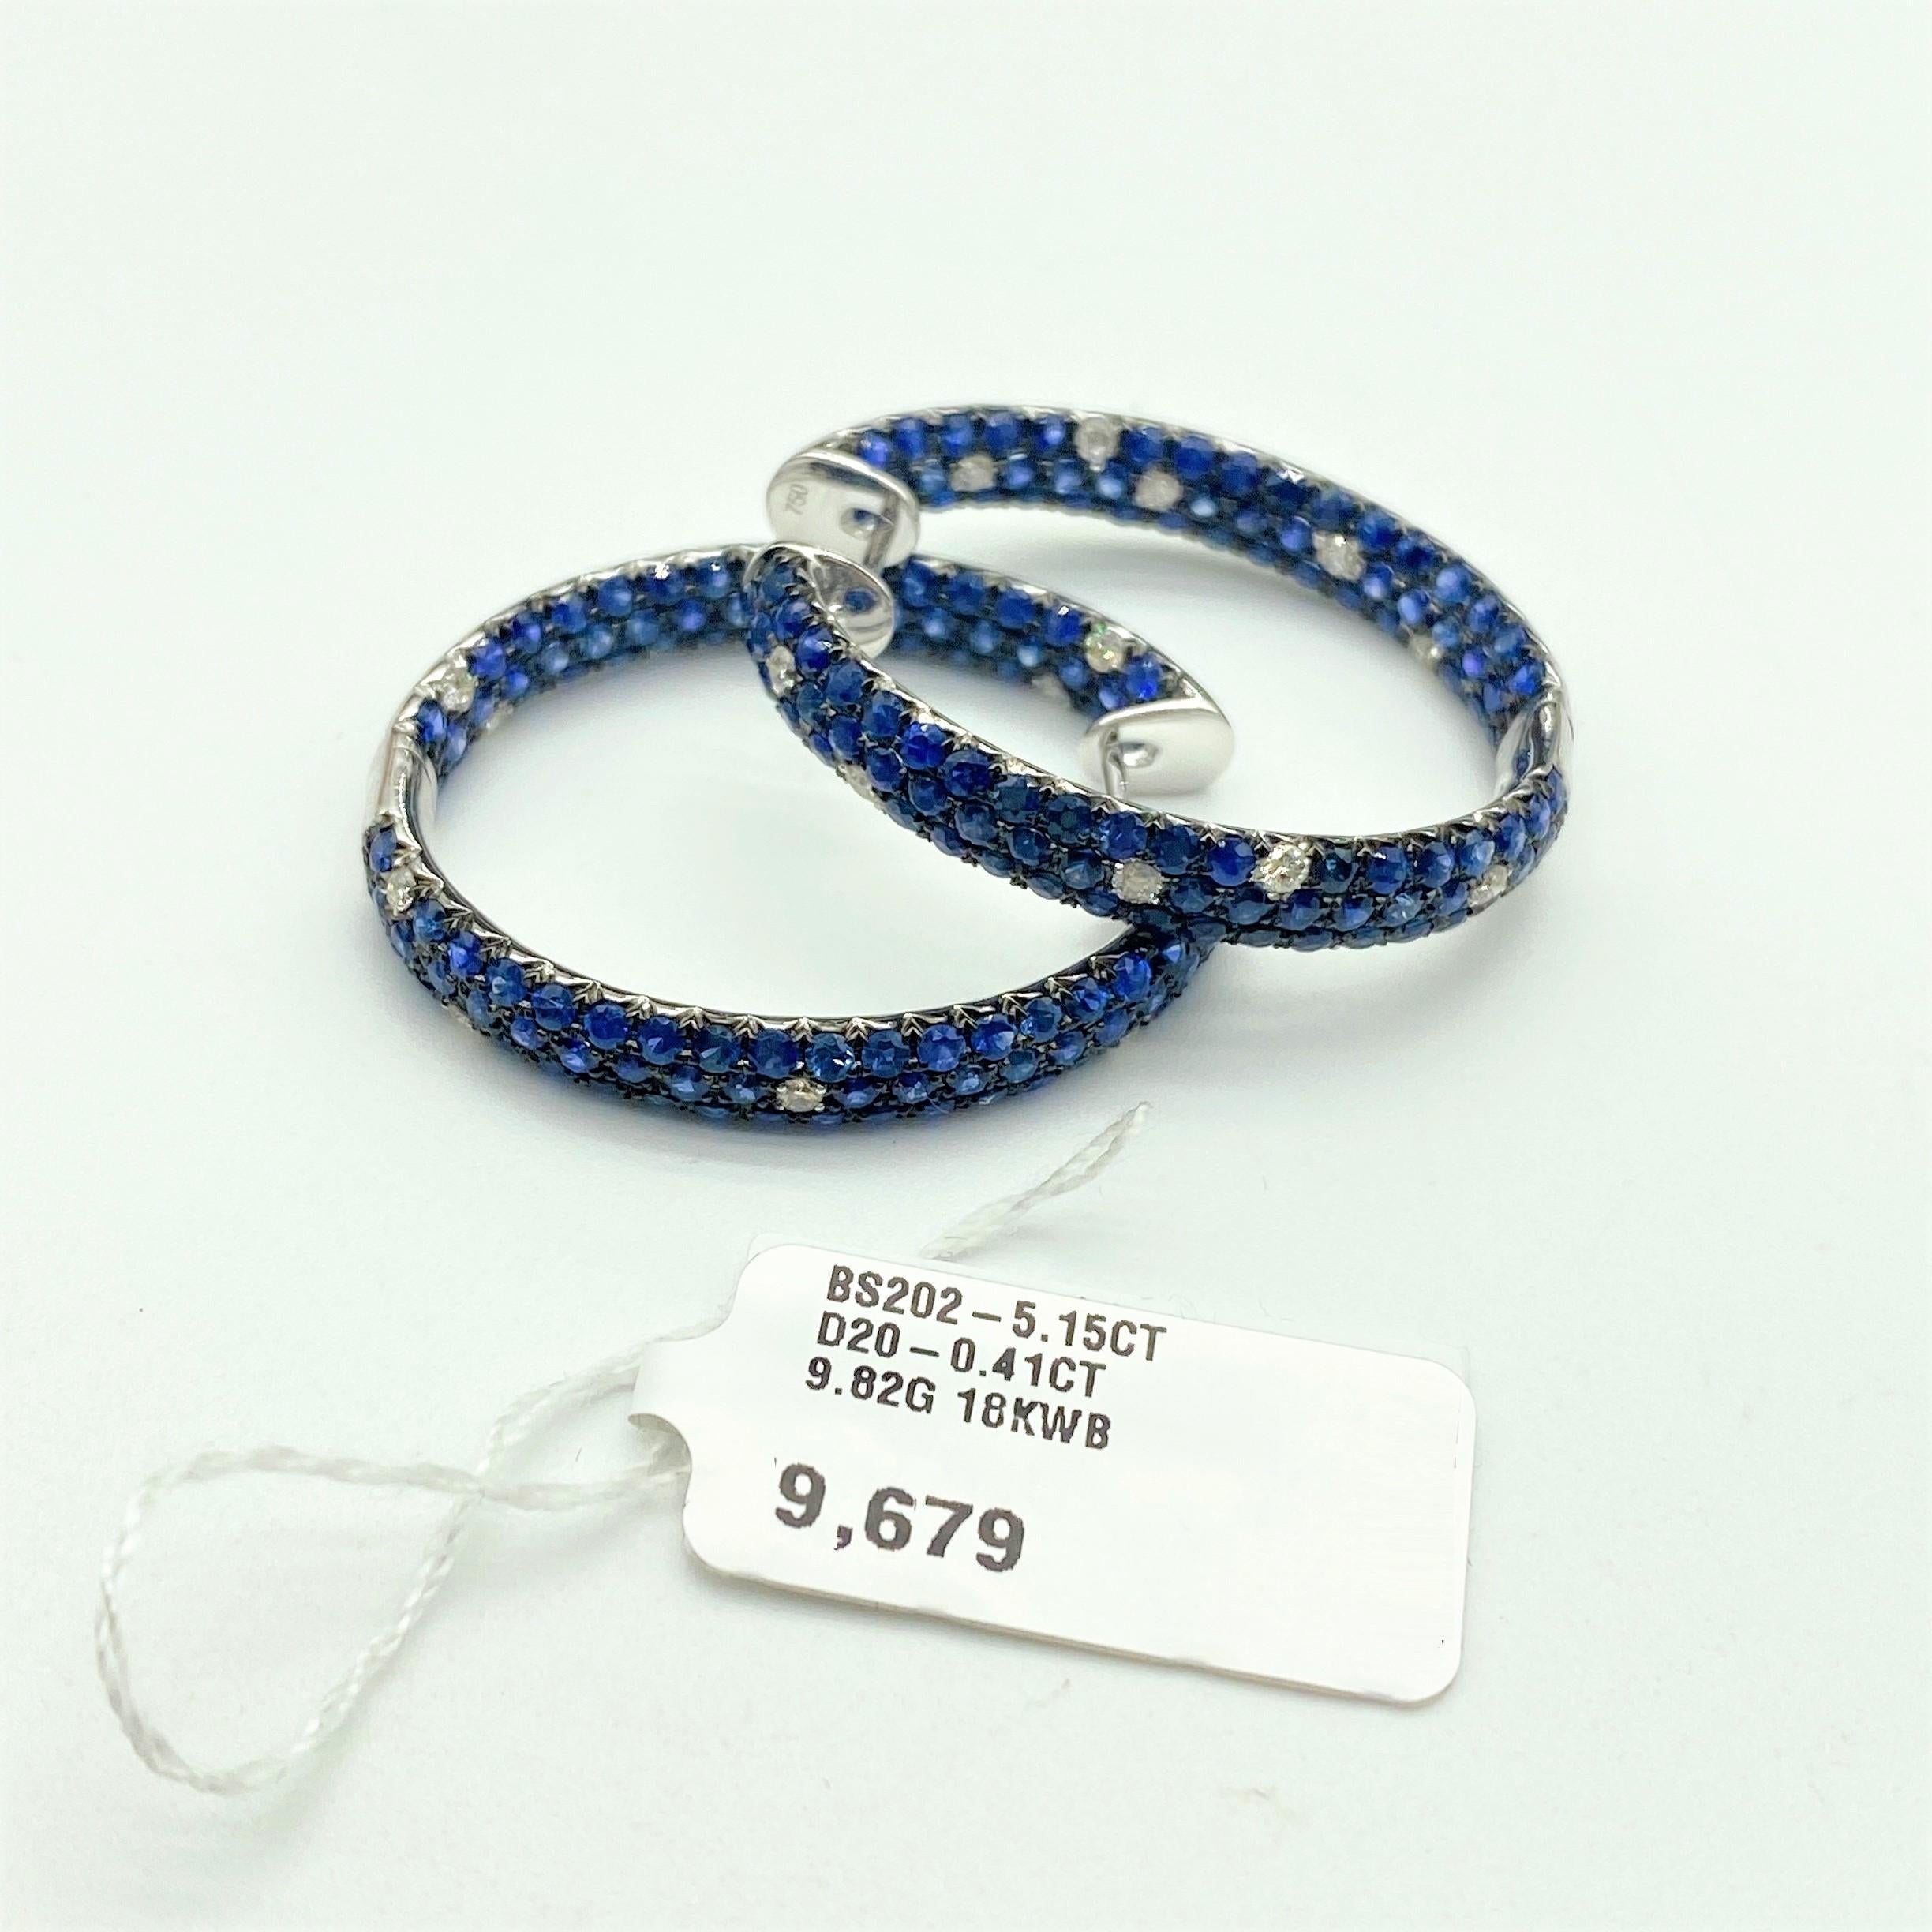 $9, 679 Exquisite 18Kt Gold Magnificent Fancy Blue Sapphire Diamond Hoop Earrings In New Condition In New York, NY